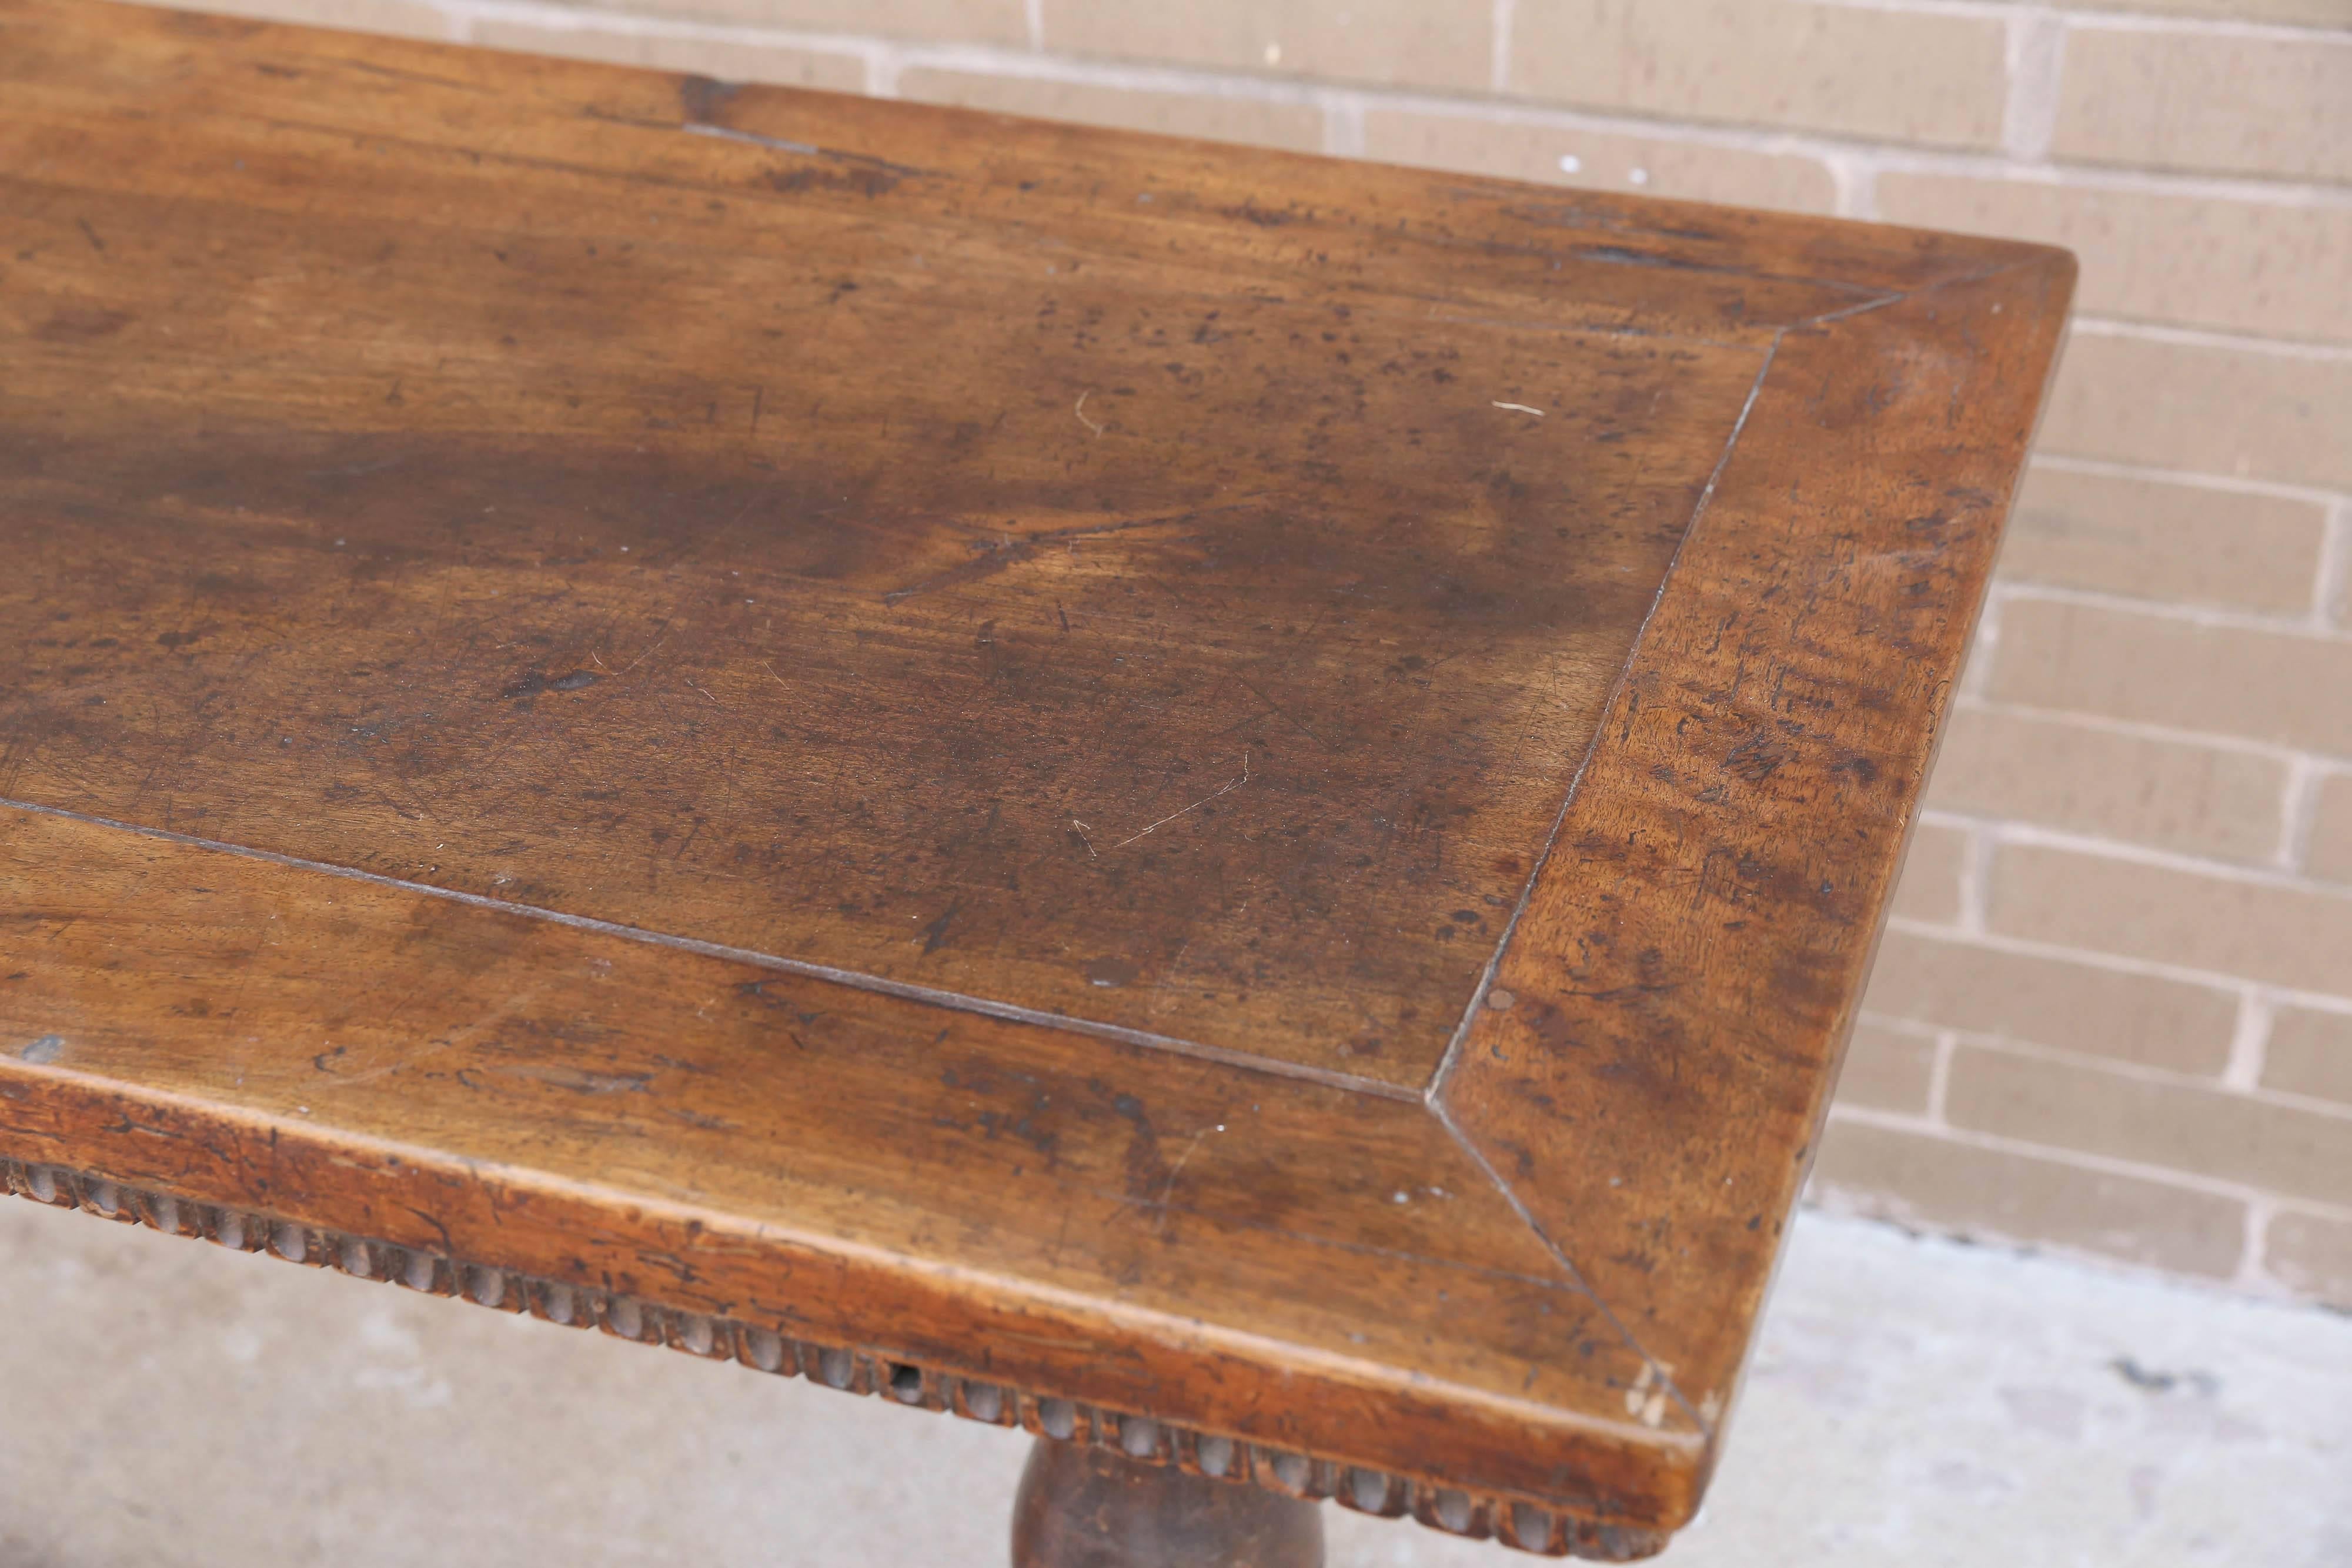 Italian handsome walnut console with carved skirt all the way around. This is all original and has a beautiful patina.